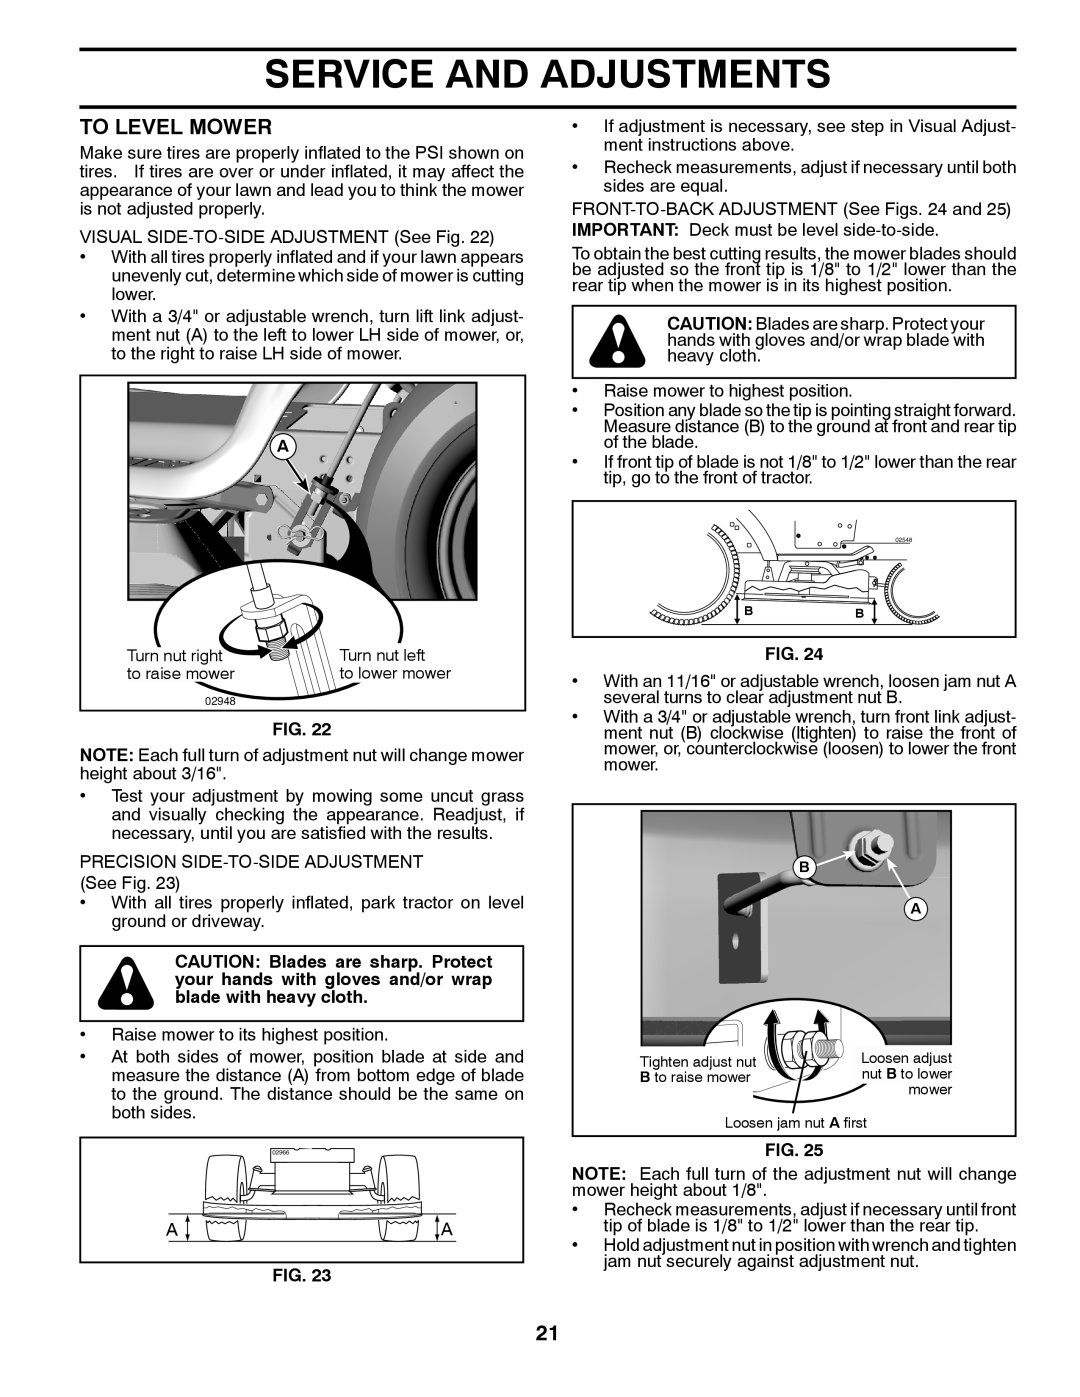 Univex 2348LS, 96043004400 owner manual To Level Mower, Service And Adjustments, Fig 